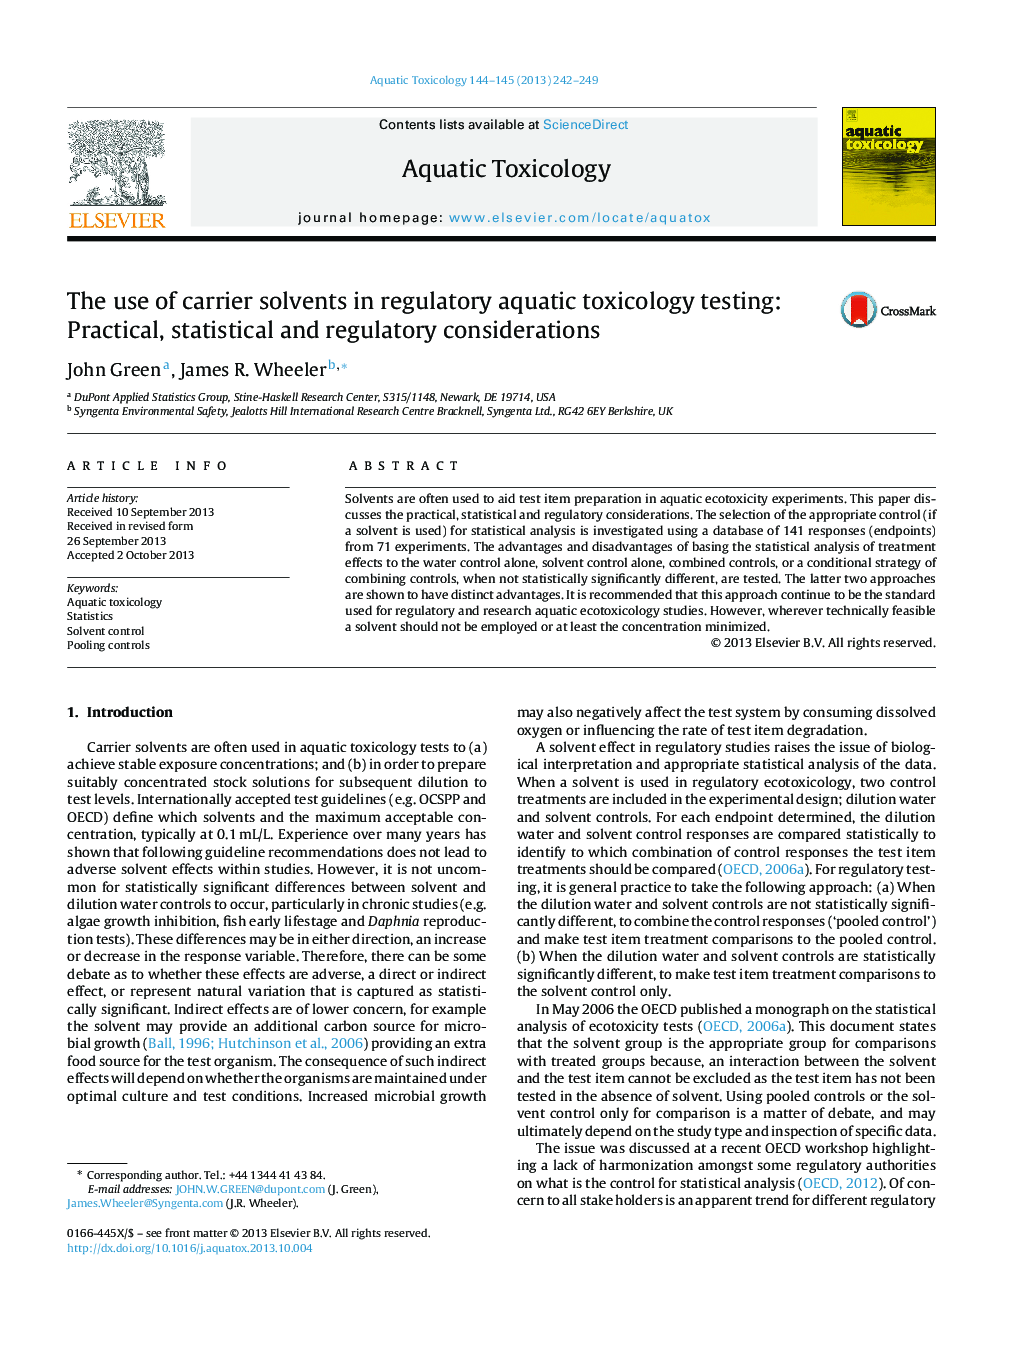 The use of carrier solvents in regulatory aquatic toxicology testing: Practical, statistical and regulatory considerations